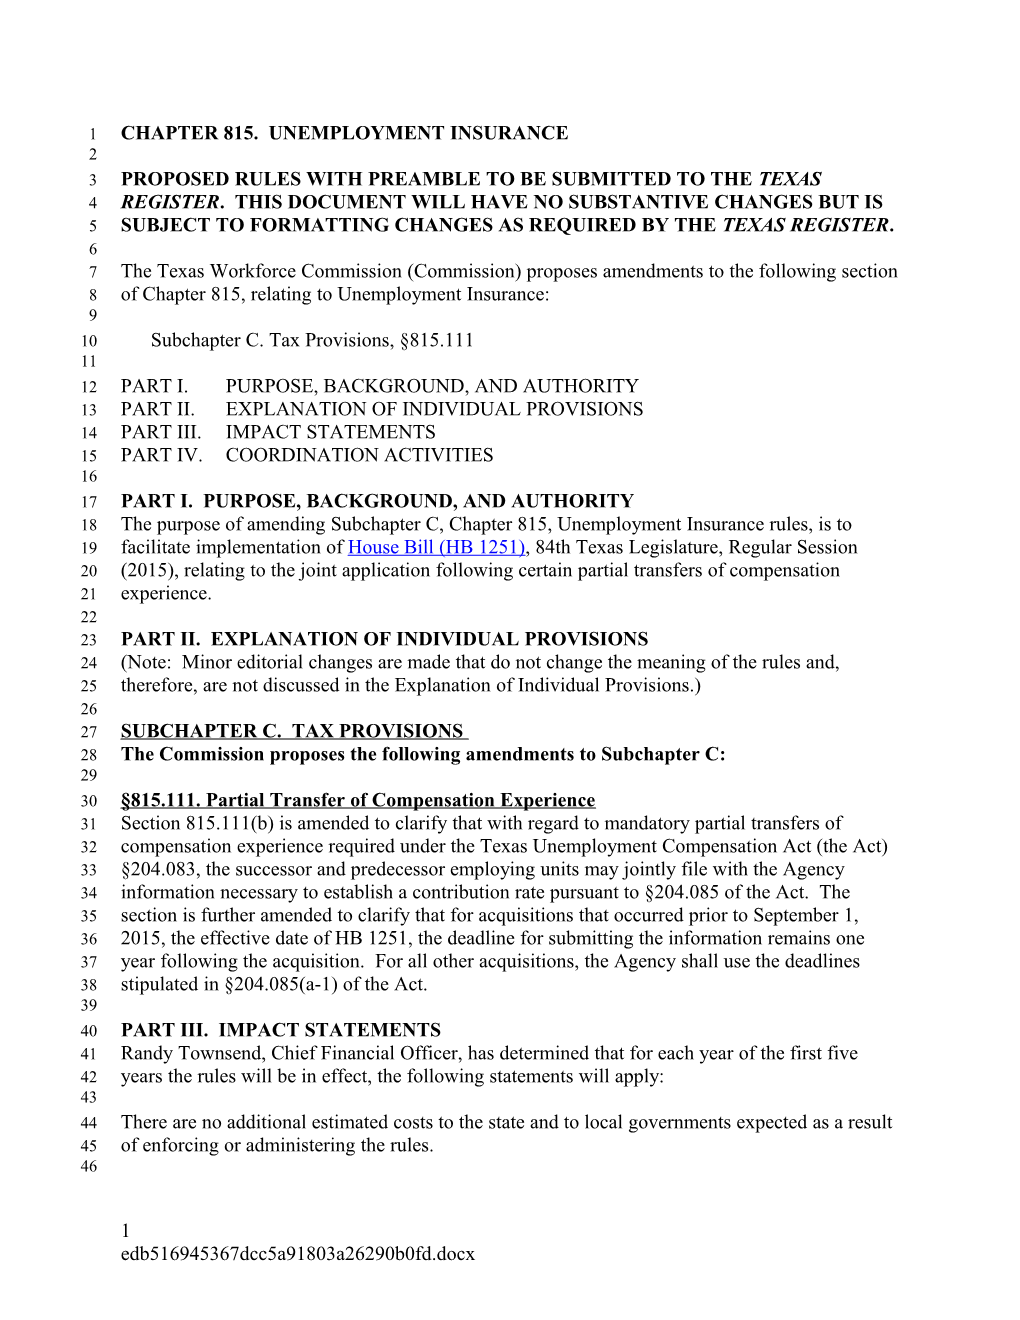 Commission Meeting Materials November 3, 2015 9:00 A.M. - Chapter 815 Proposed Rules Relating